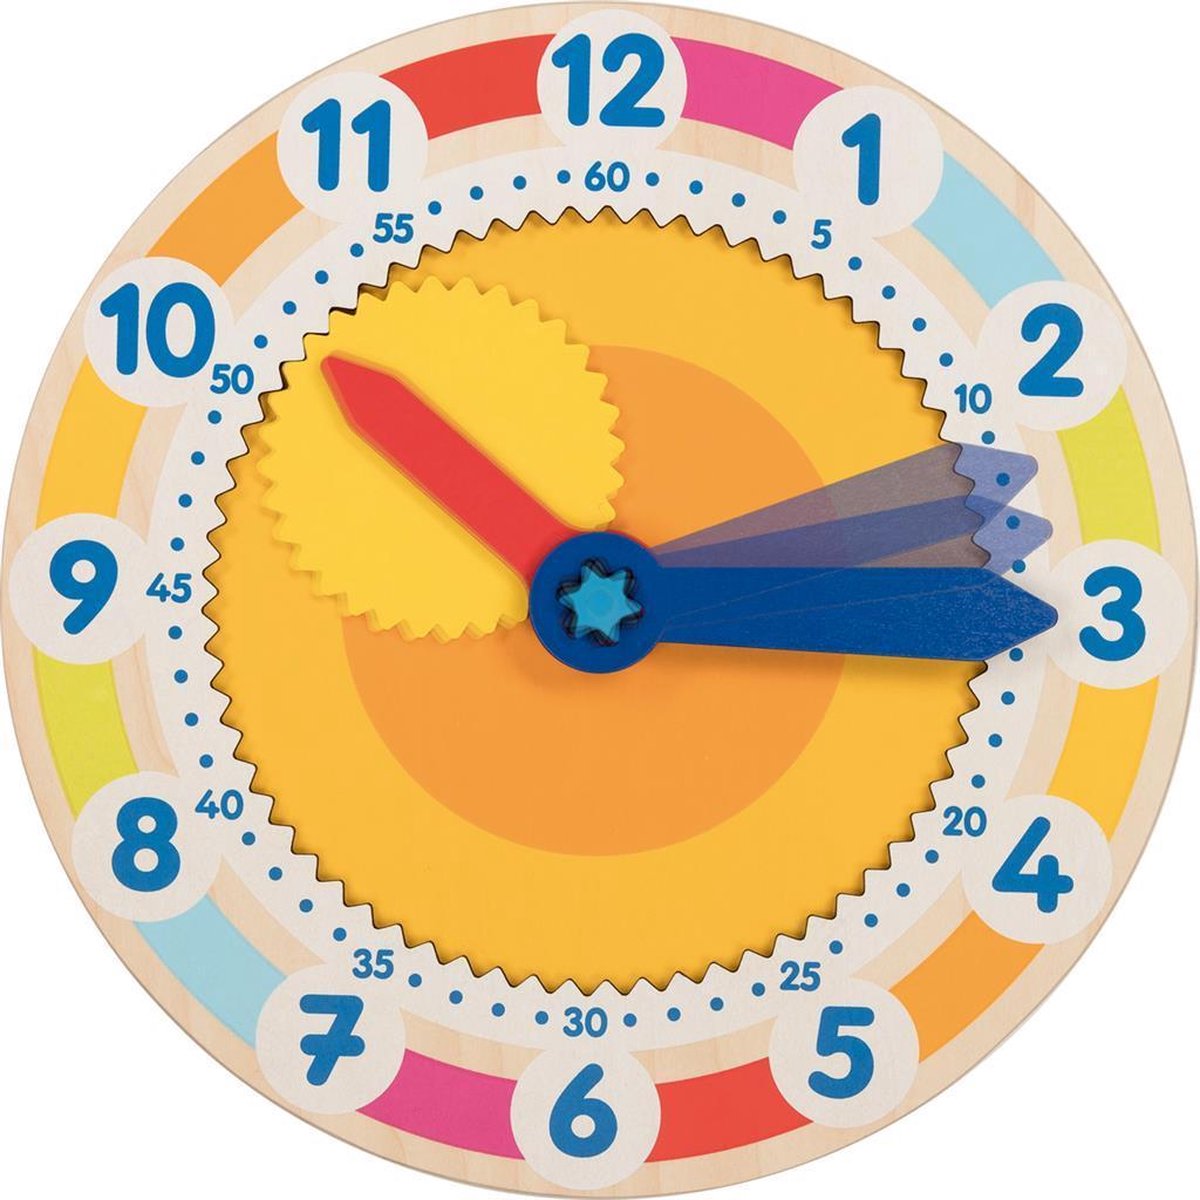 Goki Clock with cog wheel - learn to tell the time